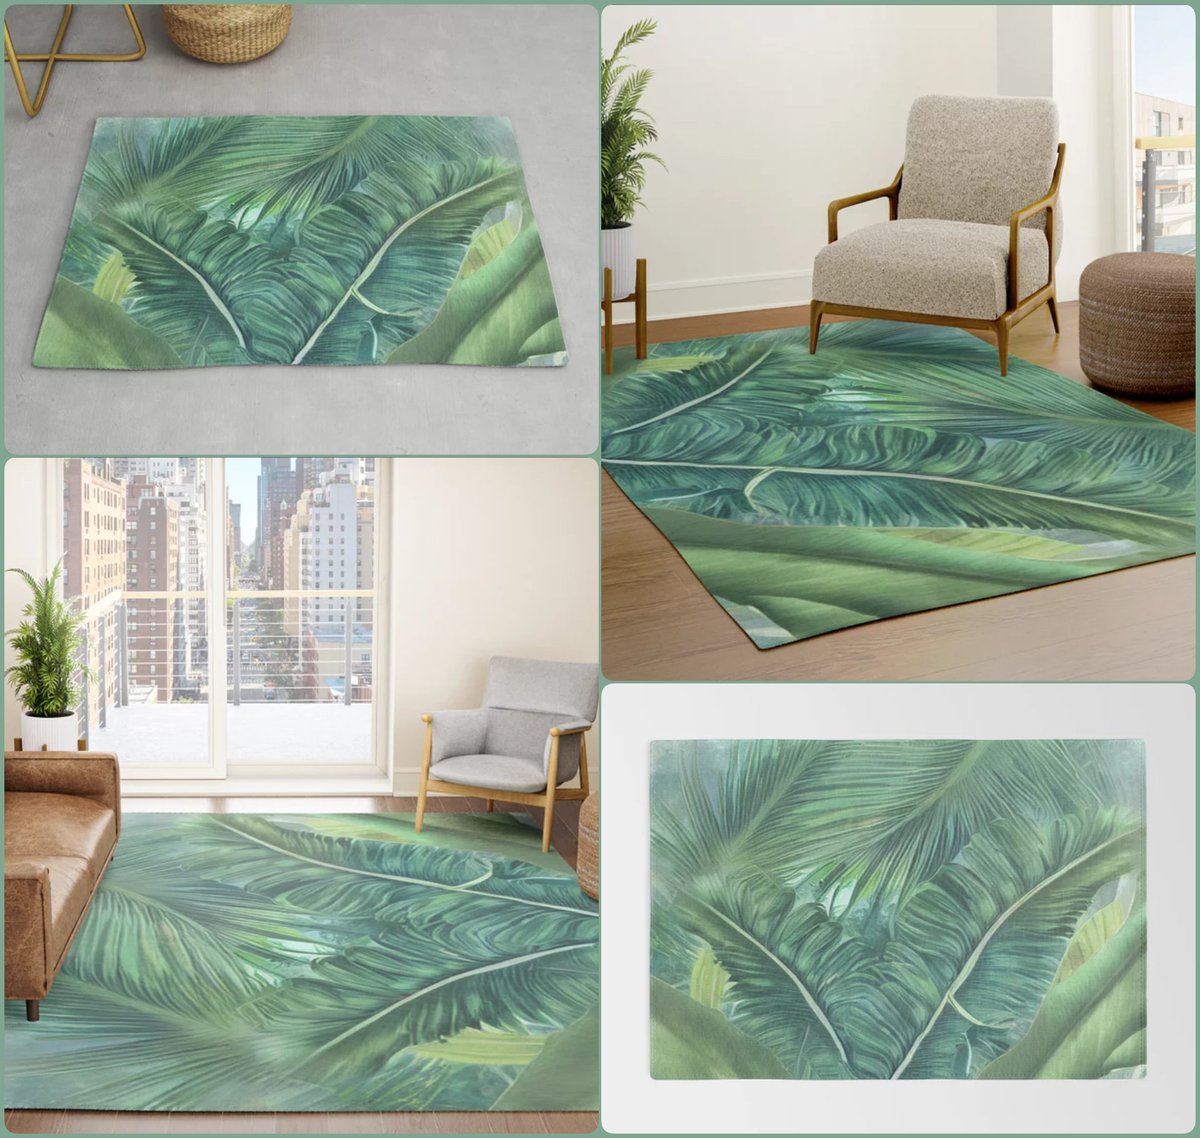 Touch of Nature Rug~by Art_Falaxy~
~Refreshingly Unique~
#artfalaxy #art #rugs #mats #homedecor #society6 #Society6max #swirls #modern #trendy #accents #floorrugs #welcome #outdoorrugs
society6.com/product/touch-…

Collection: society6.com/art/touch-of-n…